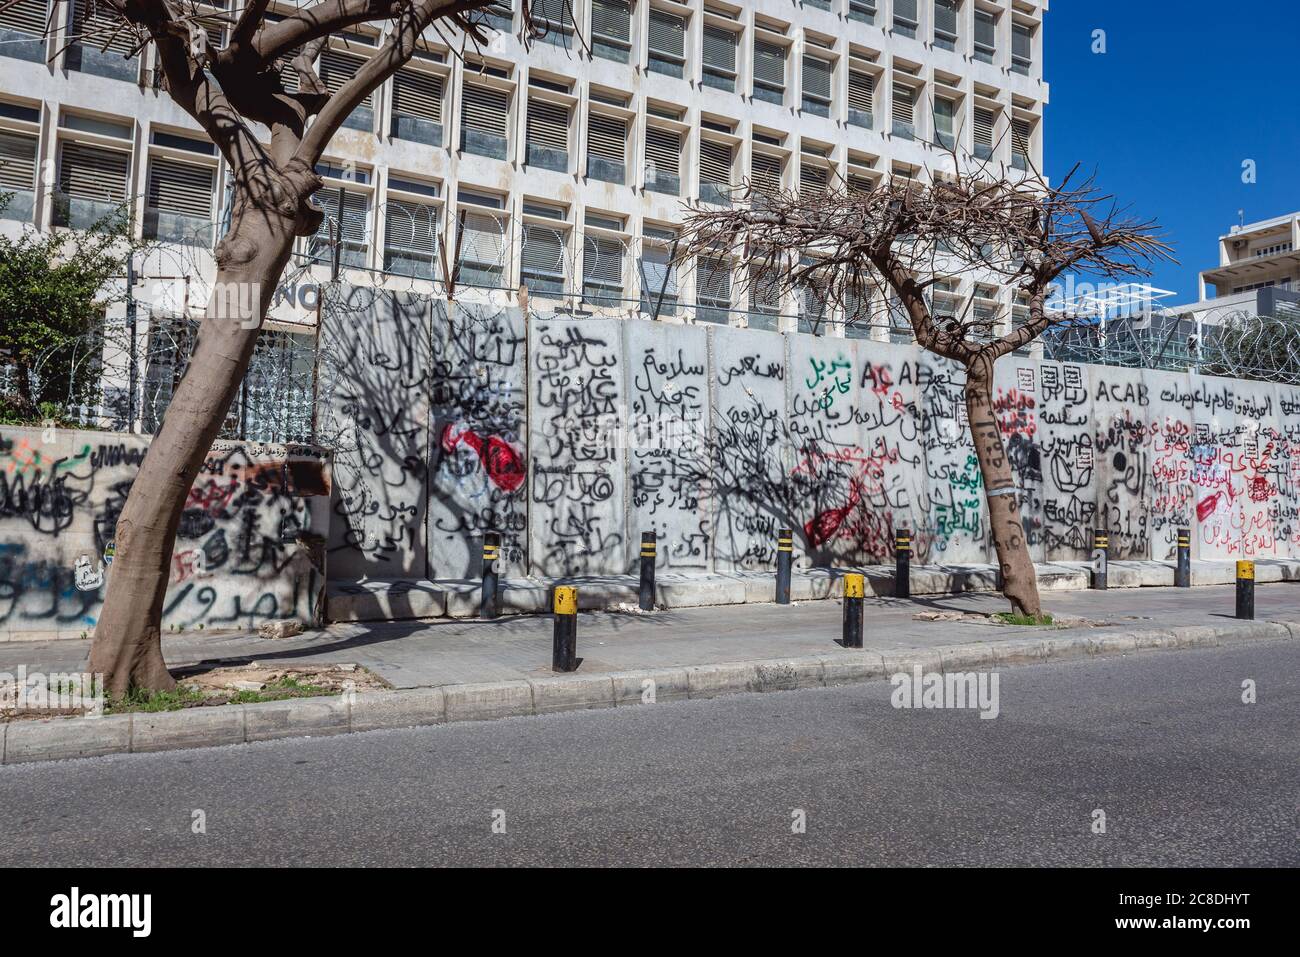 Painted wall in front of goverment building after 2019-2020 Lebanese protests in Beirut city, Lebanon Stock Photo